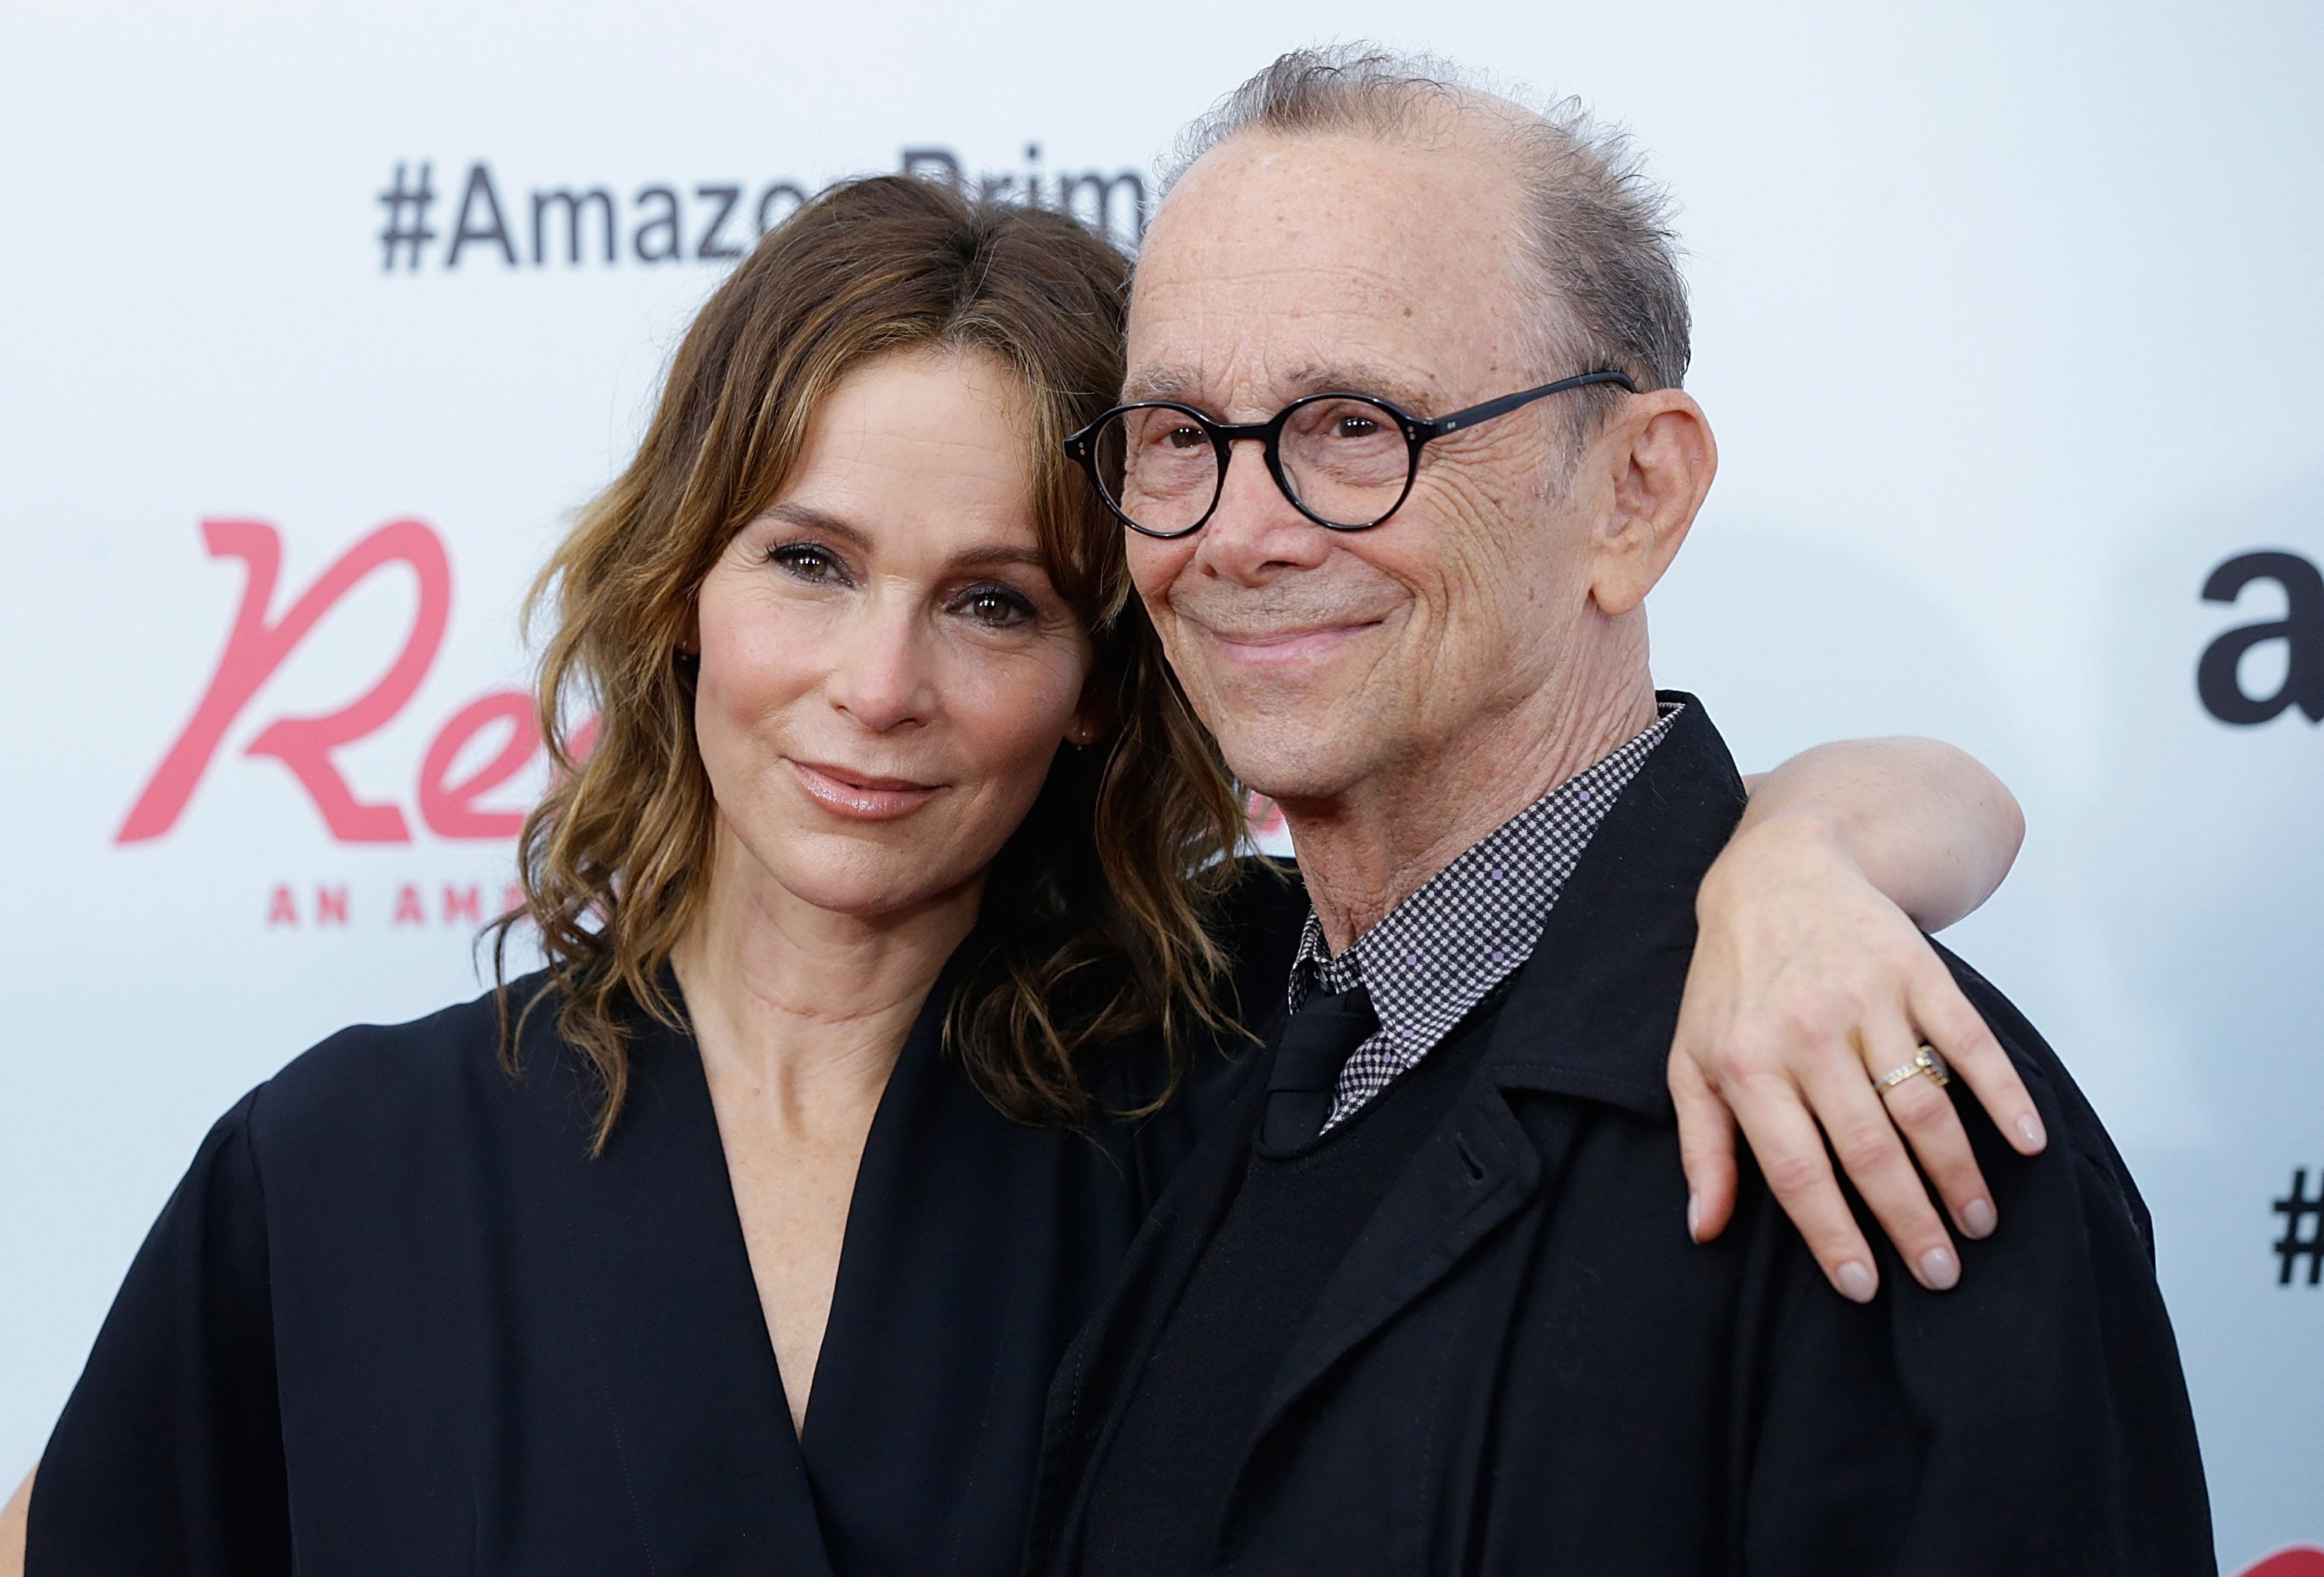 Jennifer Grey and Joel Grey at the "Red Oaks" series premiere in 2015 in New York City | Source: Getty Images